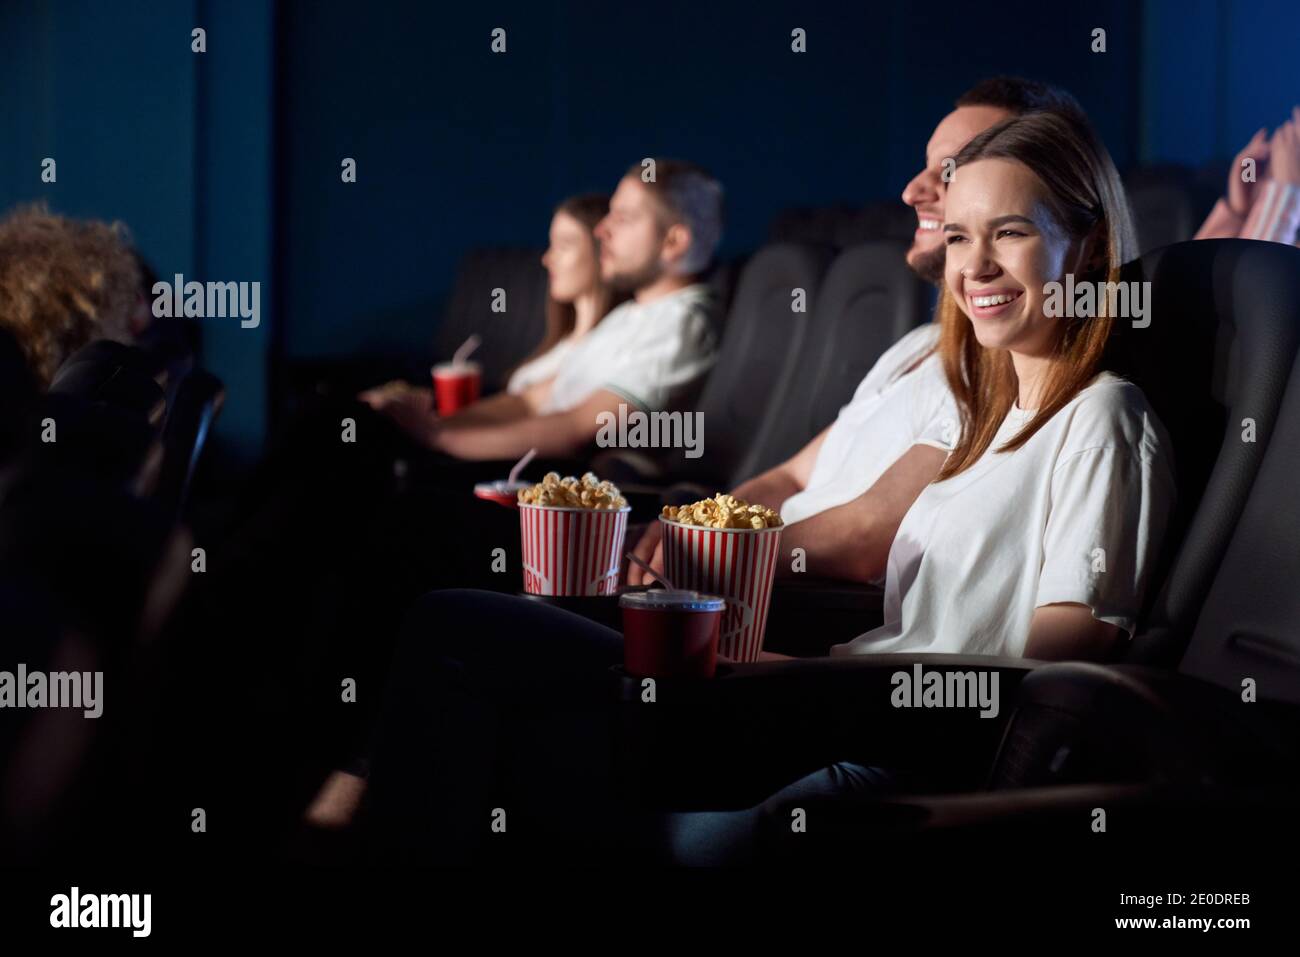 Selective focus of young girl laughing from weird situation, watching comedy in cinema. Side view of concentrated caucasian man and woman wearing white t shirts enjoying funny film. Stock Photo